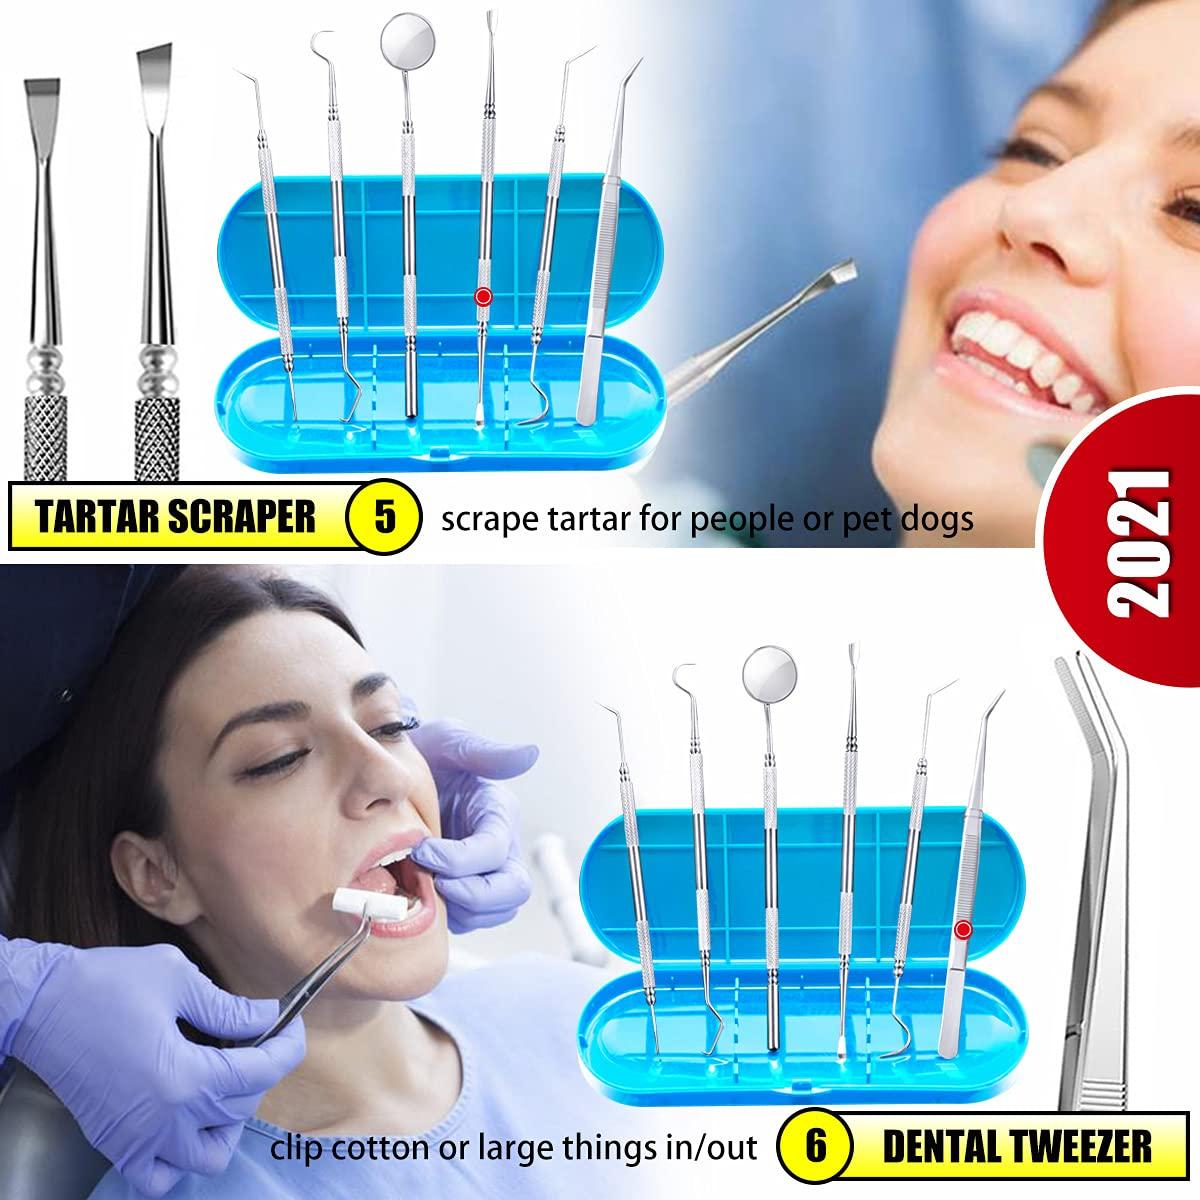  G.CATACC Dental Tools, Teeth Cleaning Tools, Professional  Dental Hygiene Kit, Plaque Remover for Teeth, Stainless Steel Tooth Scraper  Plaque Tartar Cleaner, Dental Scaler - with Case : Health & Household